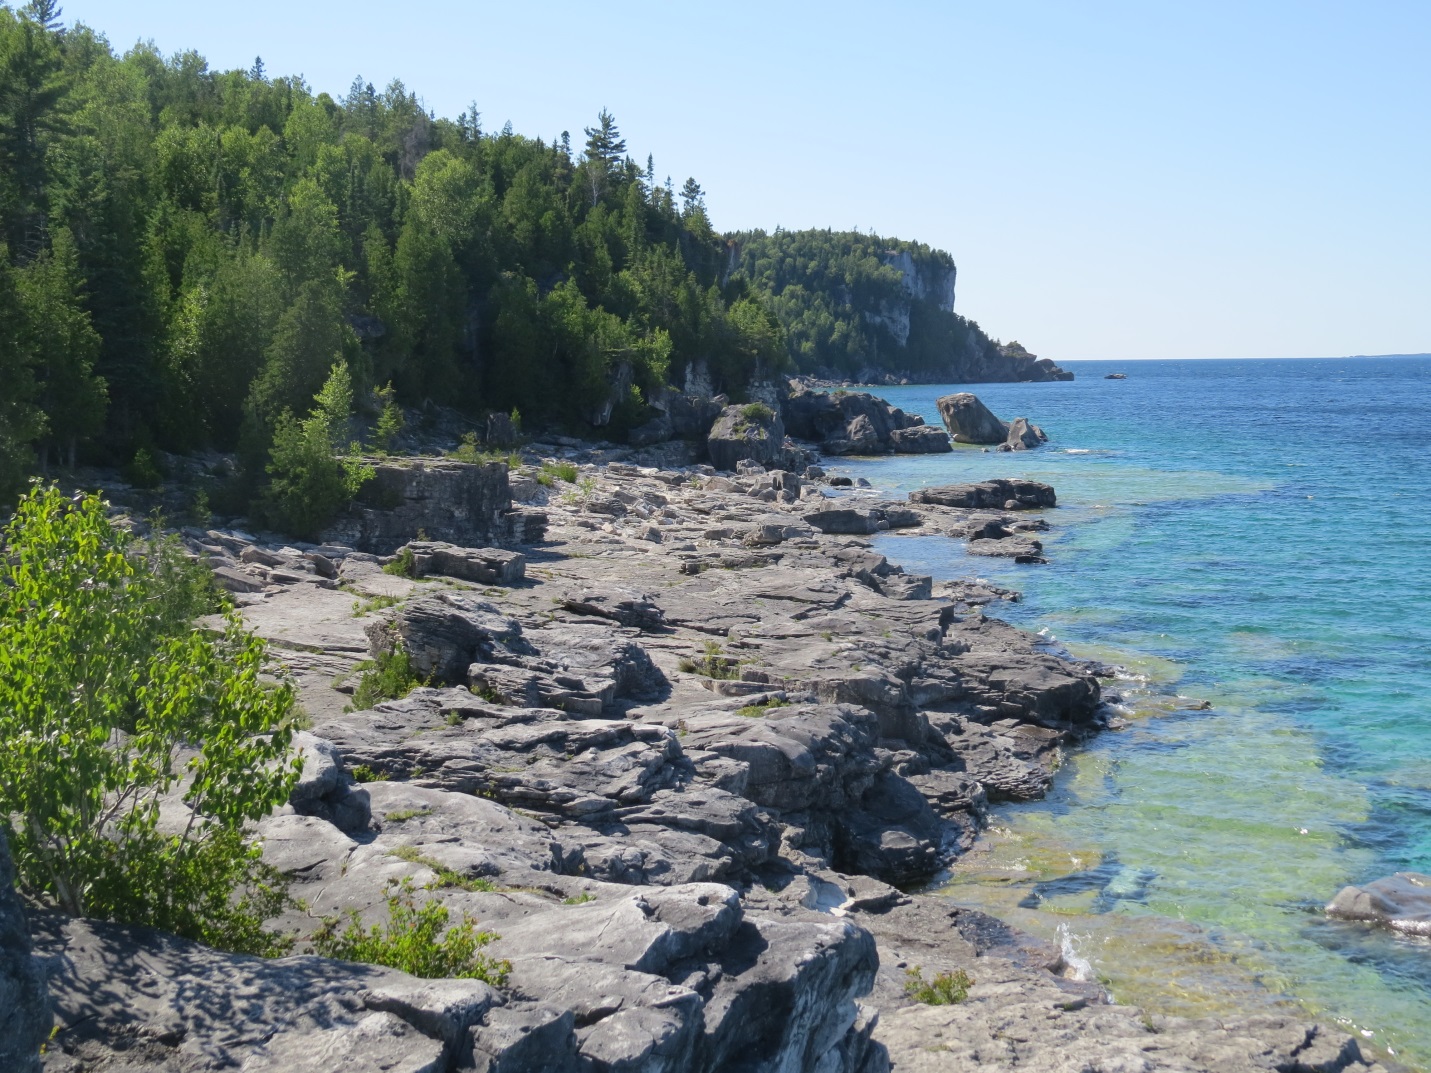 Another photo of the shoreline along Little Cove. The dolomite rock dominates the shoreline and the large cliffs are visible in the background.  